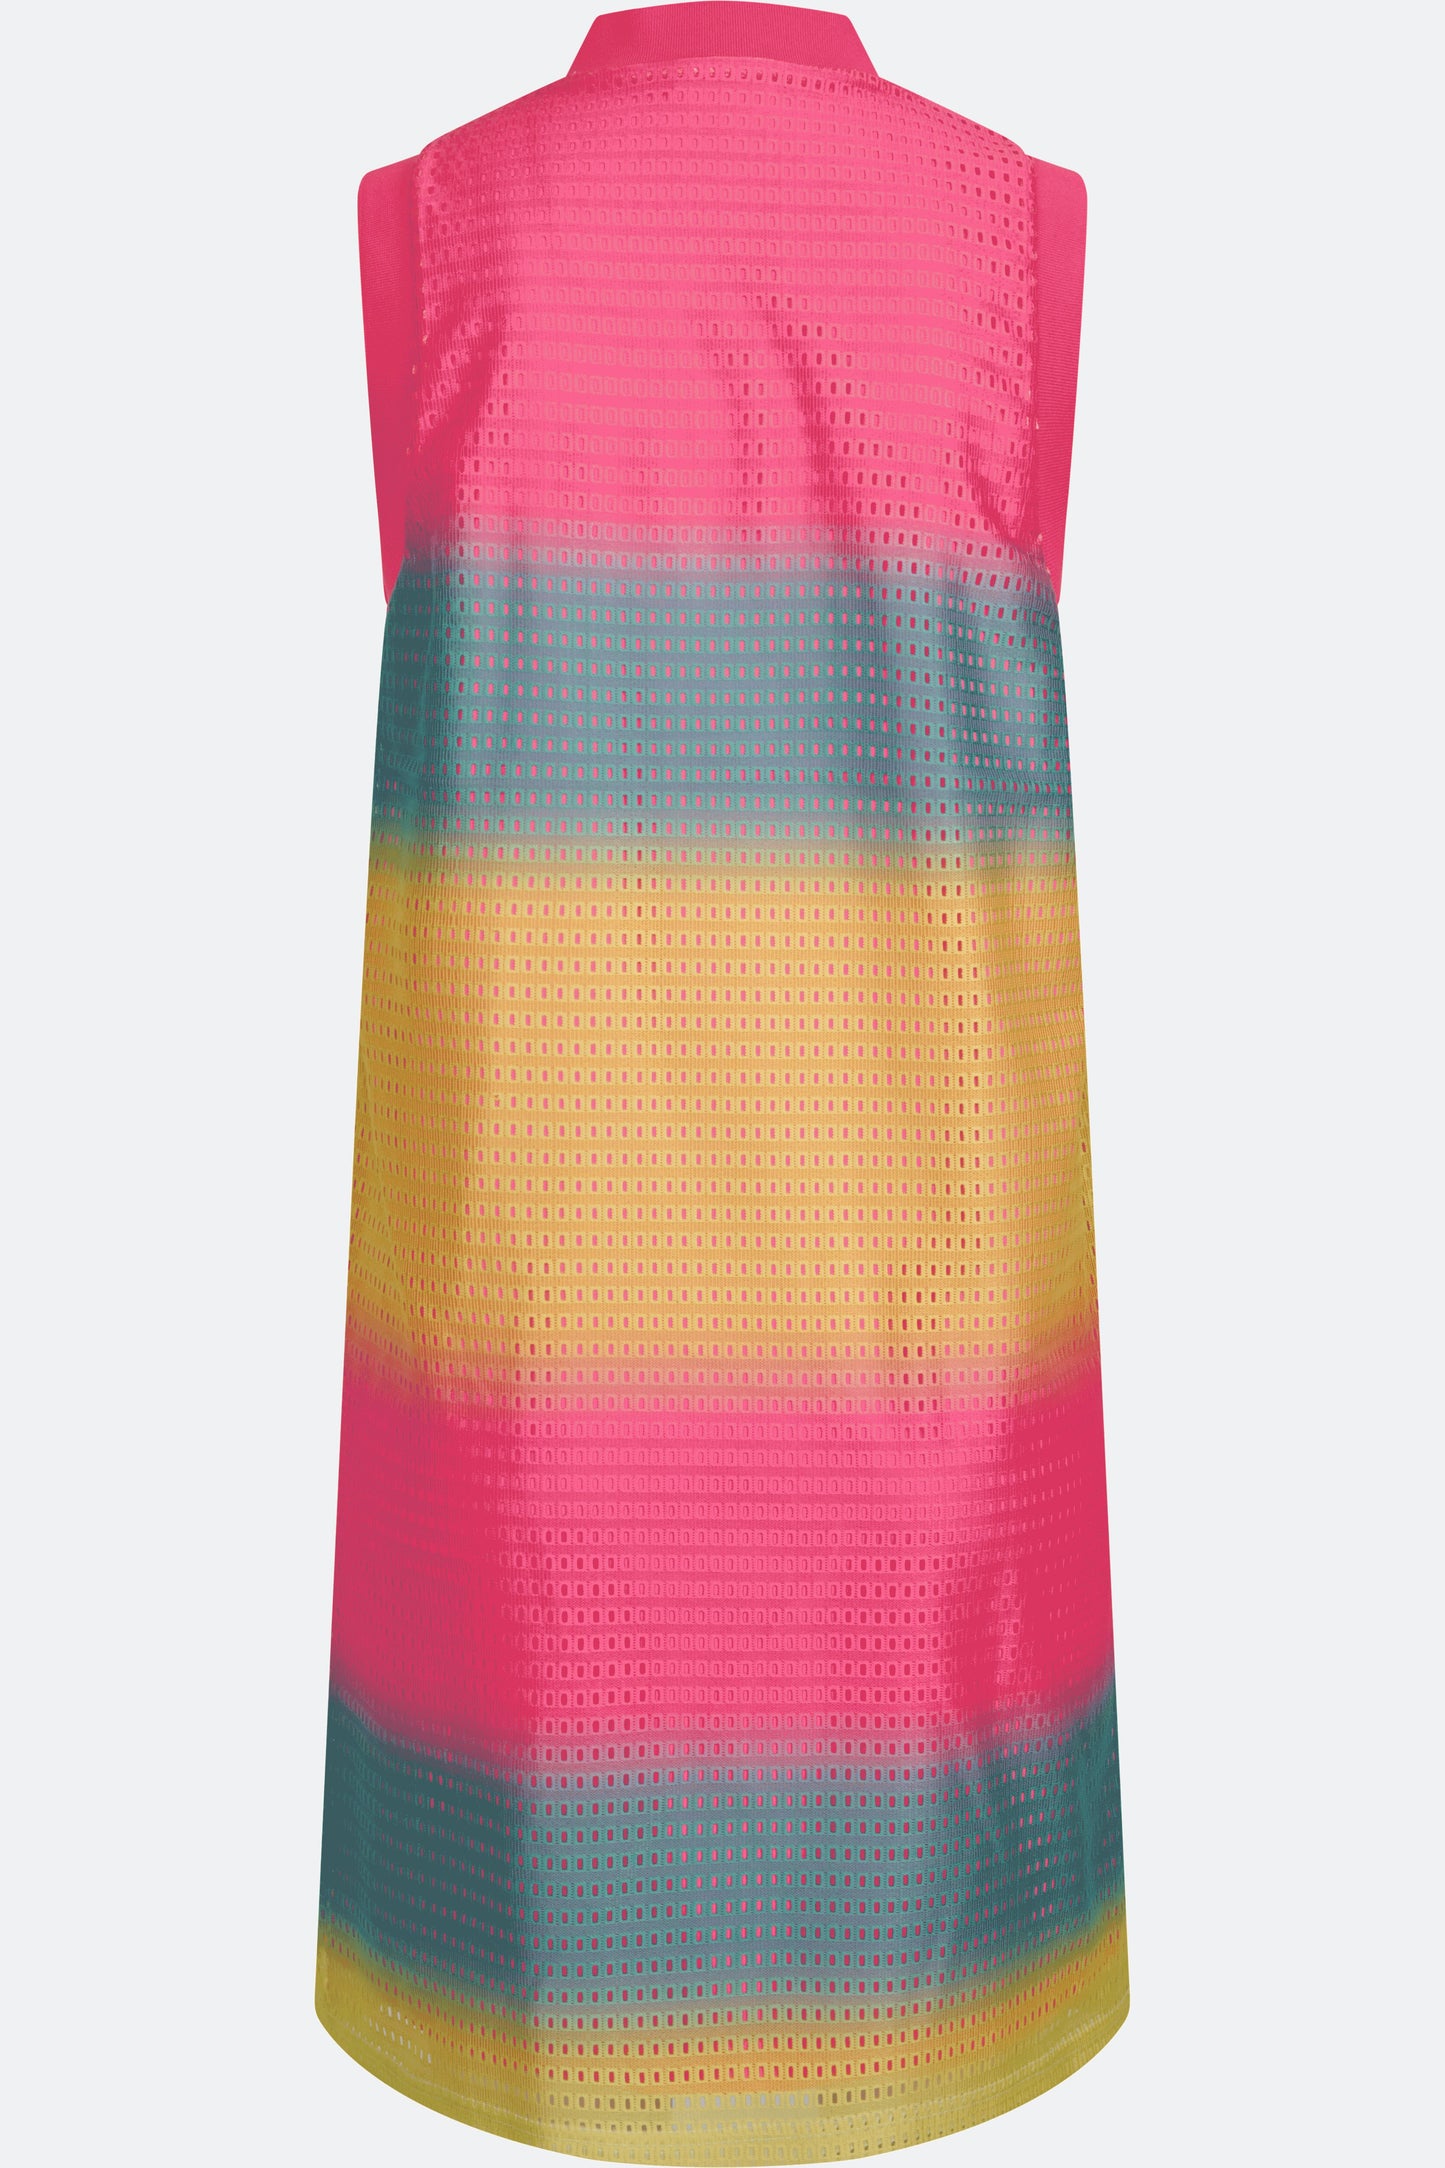 Sleeveless Golf Dress with Color Block